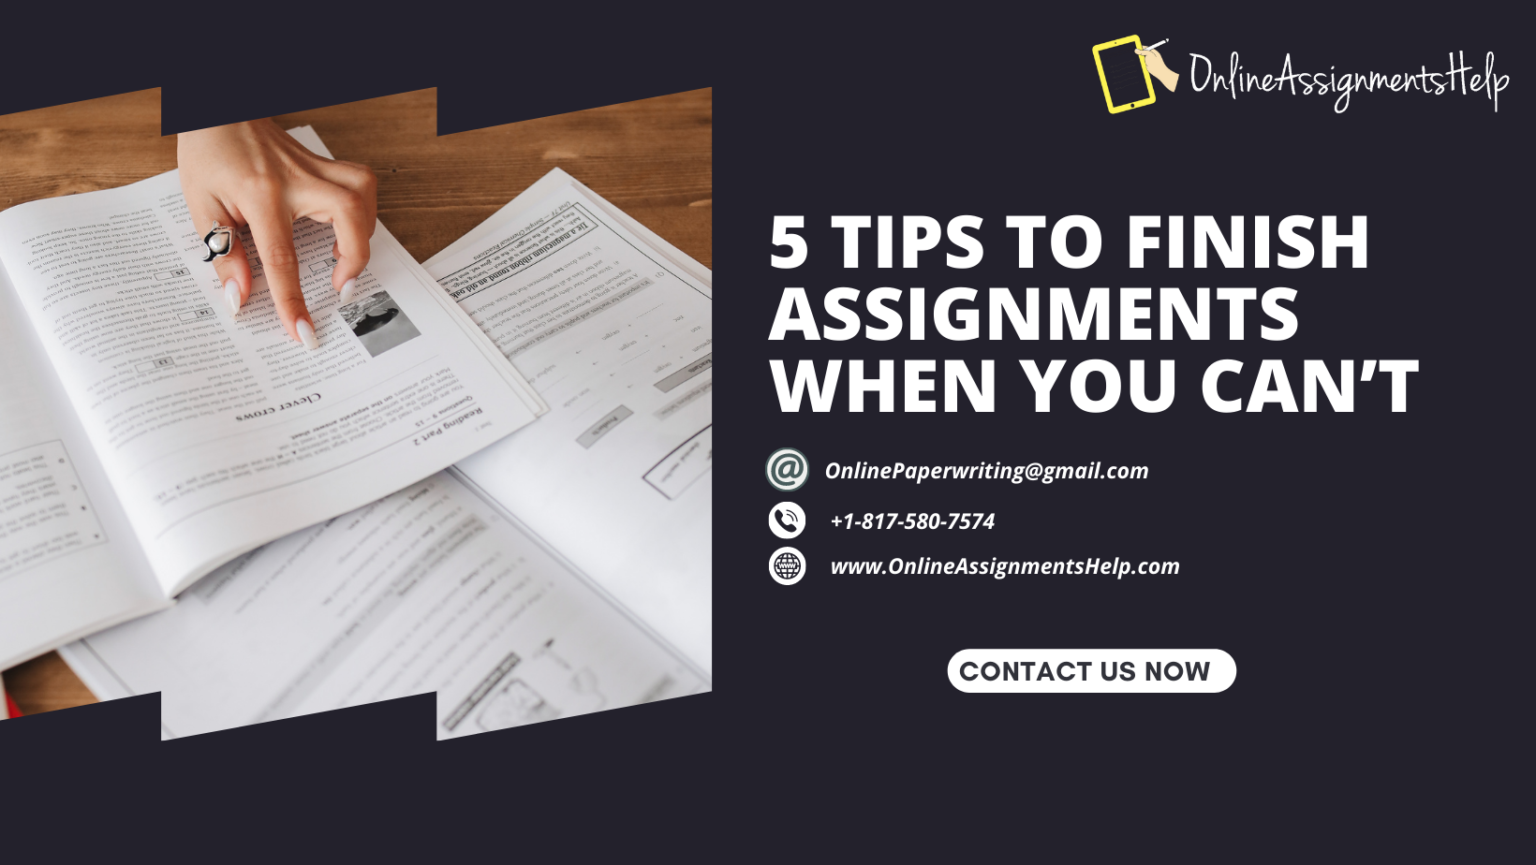 how to finish assignments quickly reddit